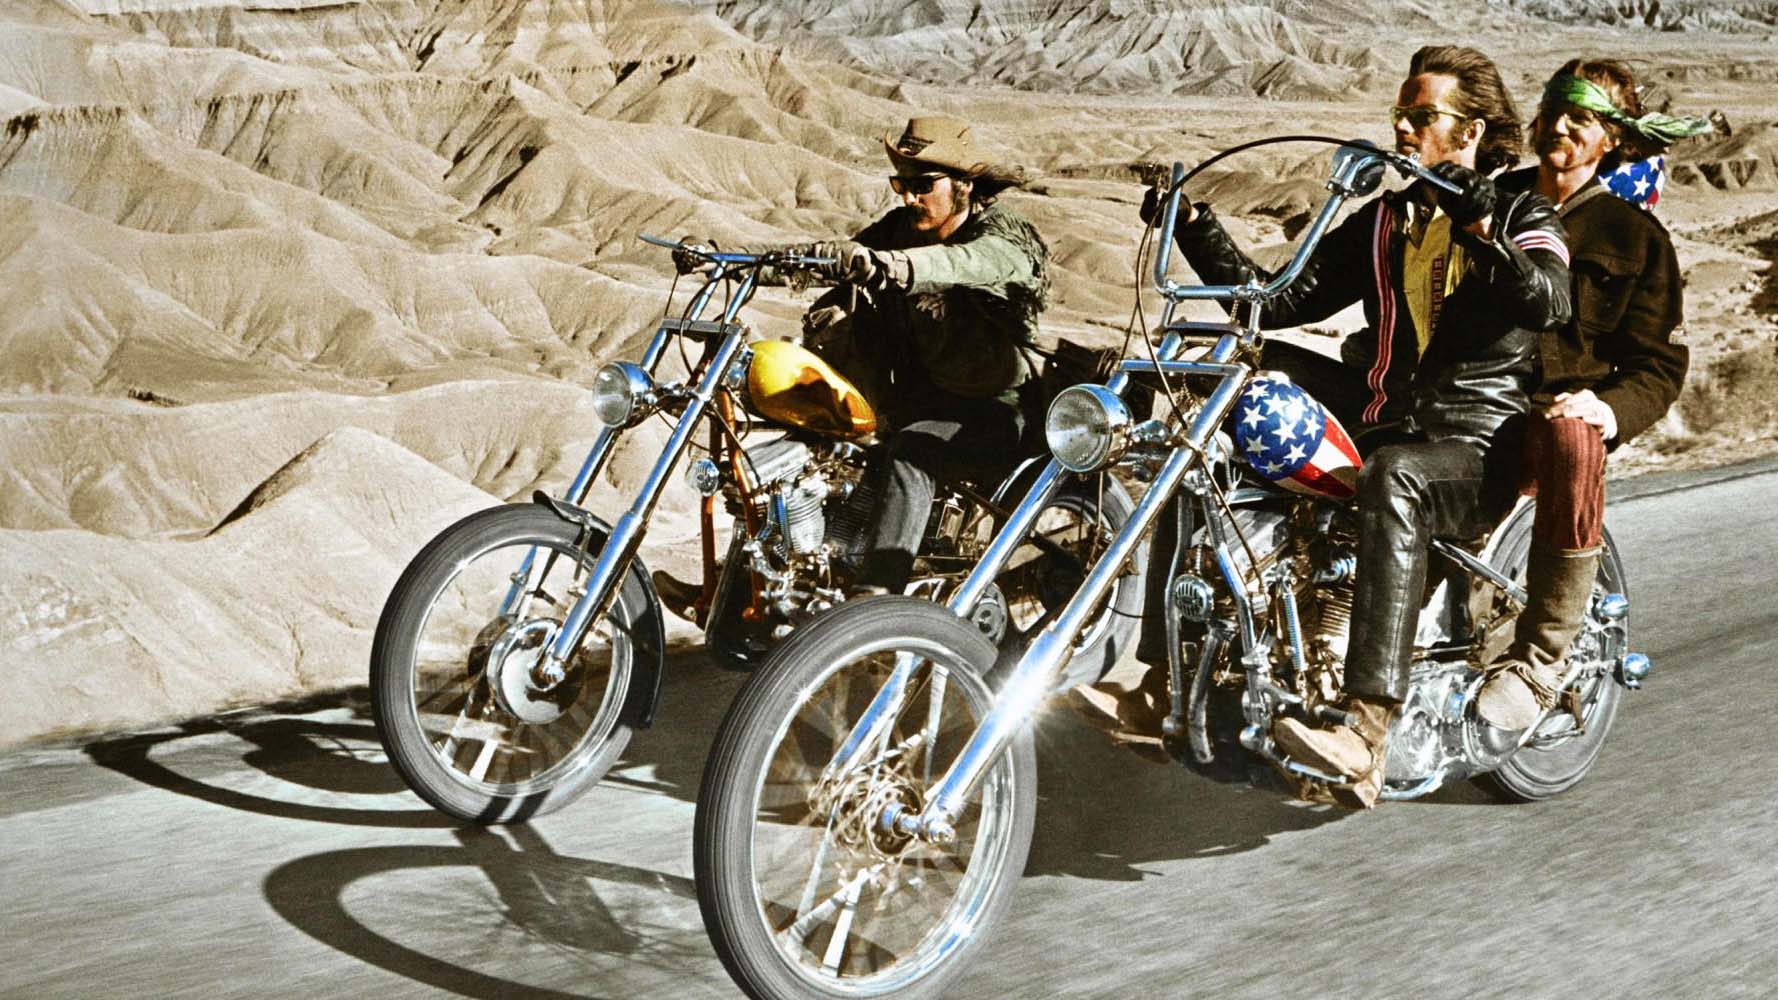 The chopper hit pop-culture pay dirt in 1969 with <em>Easy Rider</em>. Peter Fonda's bike, called Captain America, became a star in its own right, and suddenly, everybody had to have their own chopper. So far none have matched, let alone exceeded, this definitive bike. To this day, nearly a half-century later, fans still customize their own bikes to mimic the most famous chopper of all.